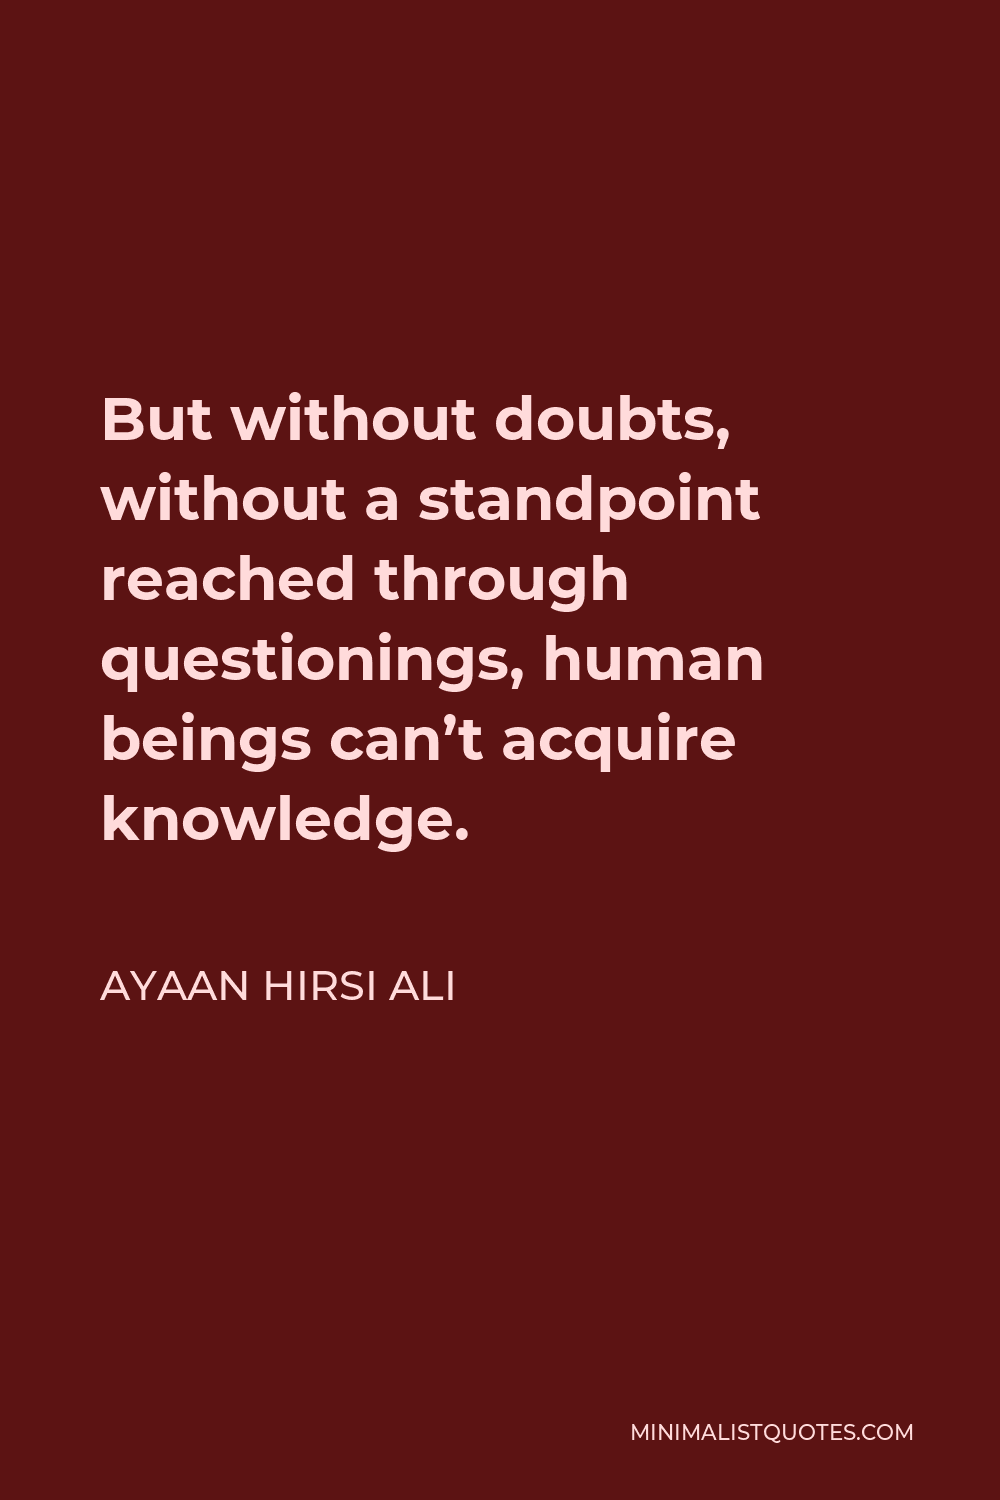 Ayaan Hirsi Ali Quote - But without doubts, without a standpoint reached through questionings, human beings can’t acquire knowledge.